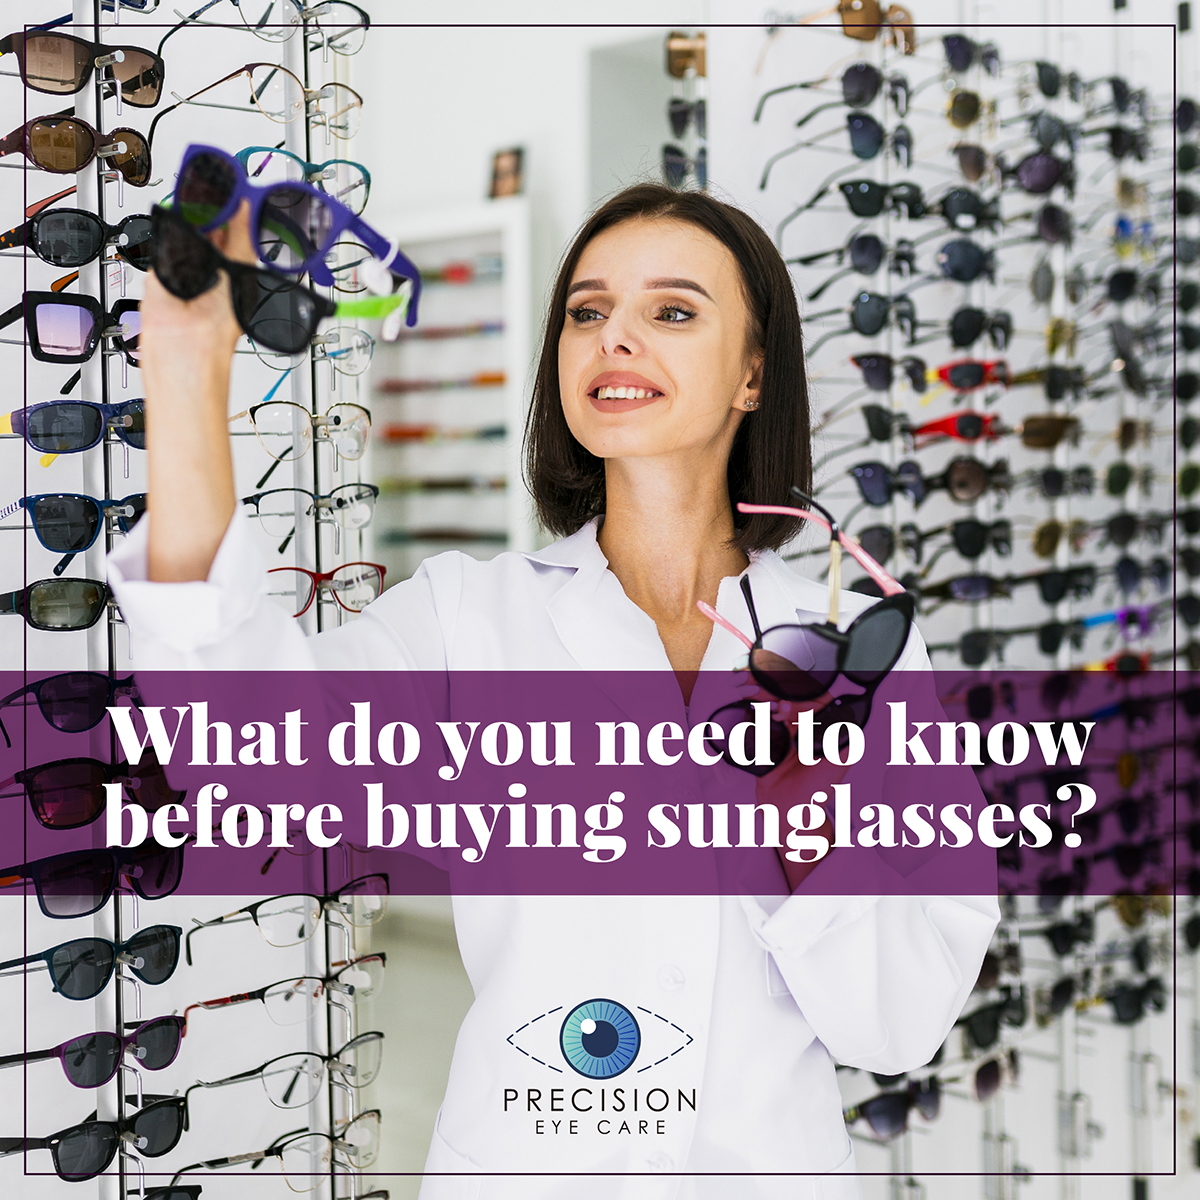 What you need to know before buying sunglasses?